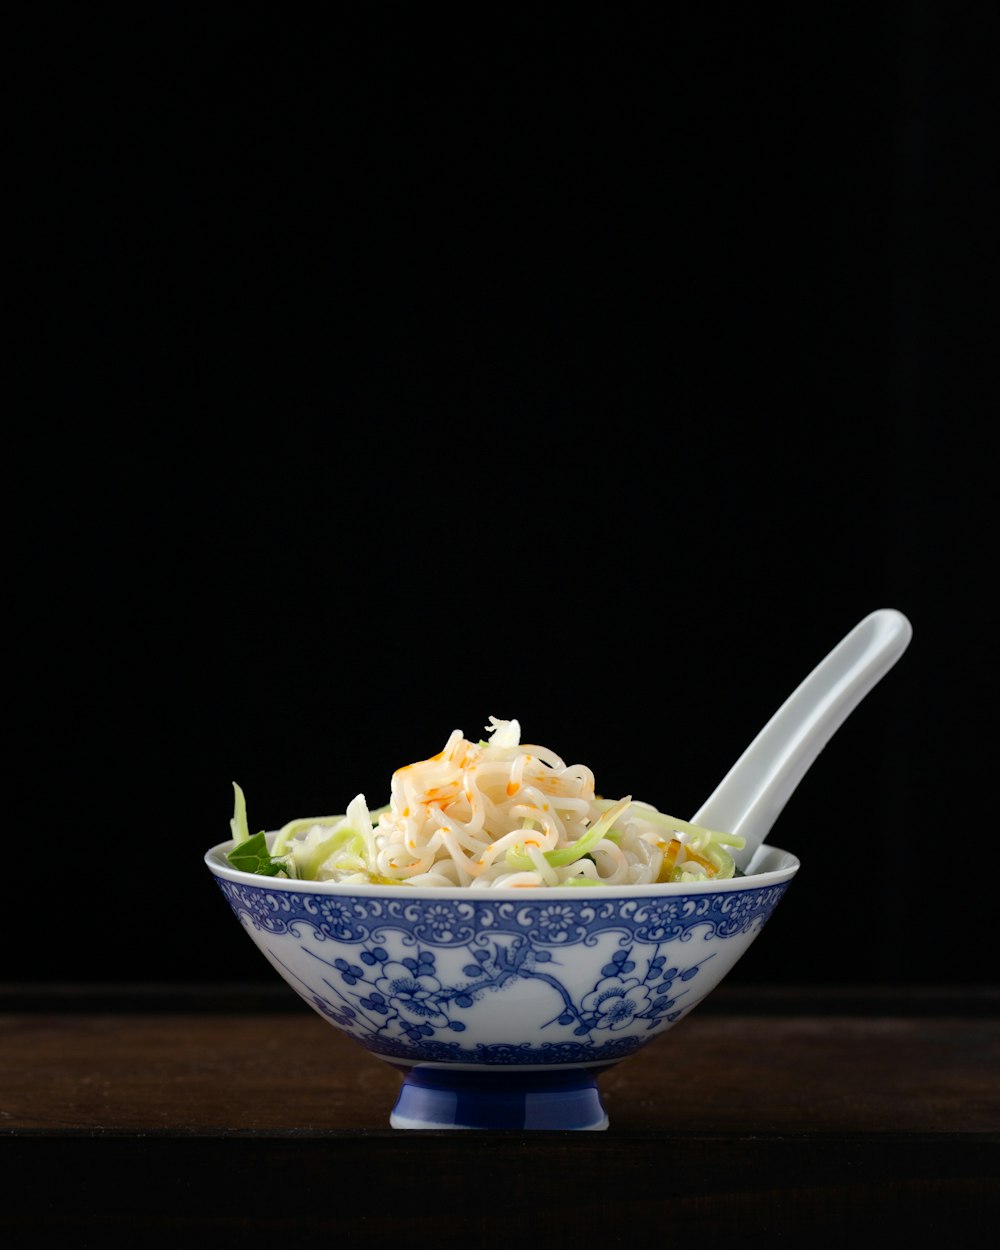 noodles in white and blur floral bowl